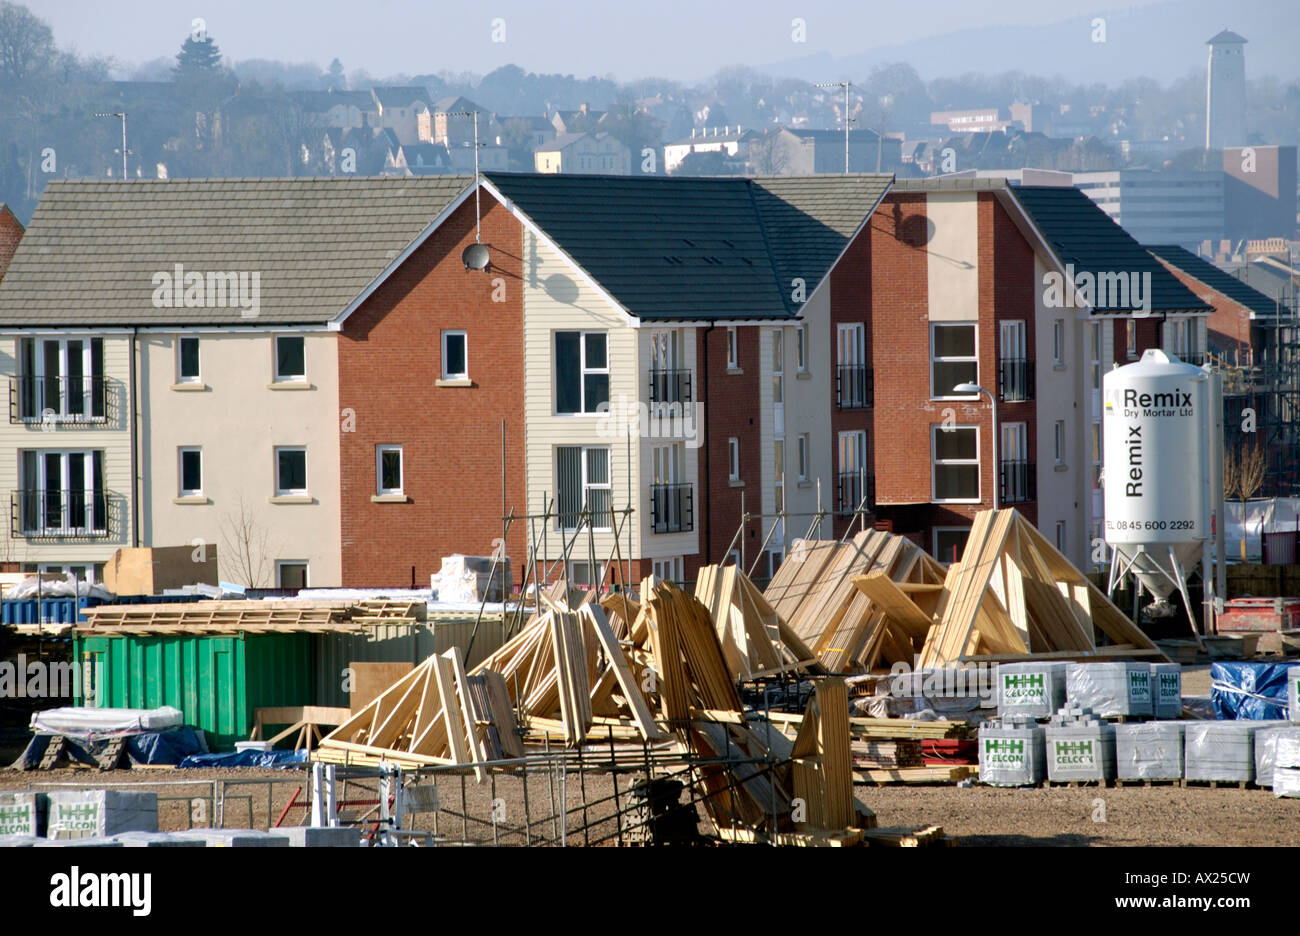 Mixed housing stock under construction in Newport South Wales UK Stock Photo